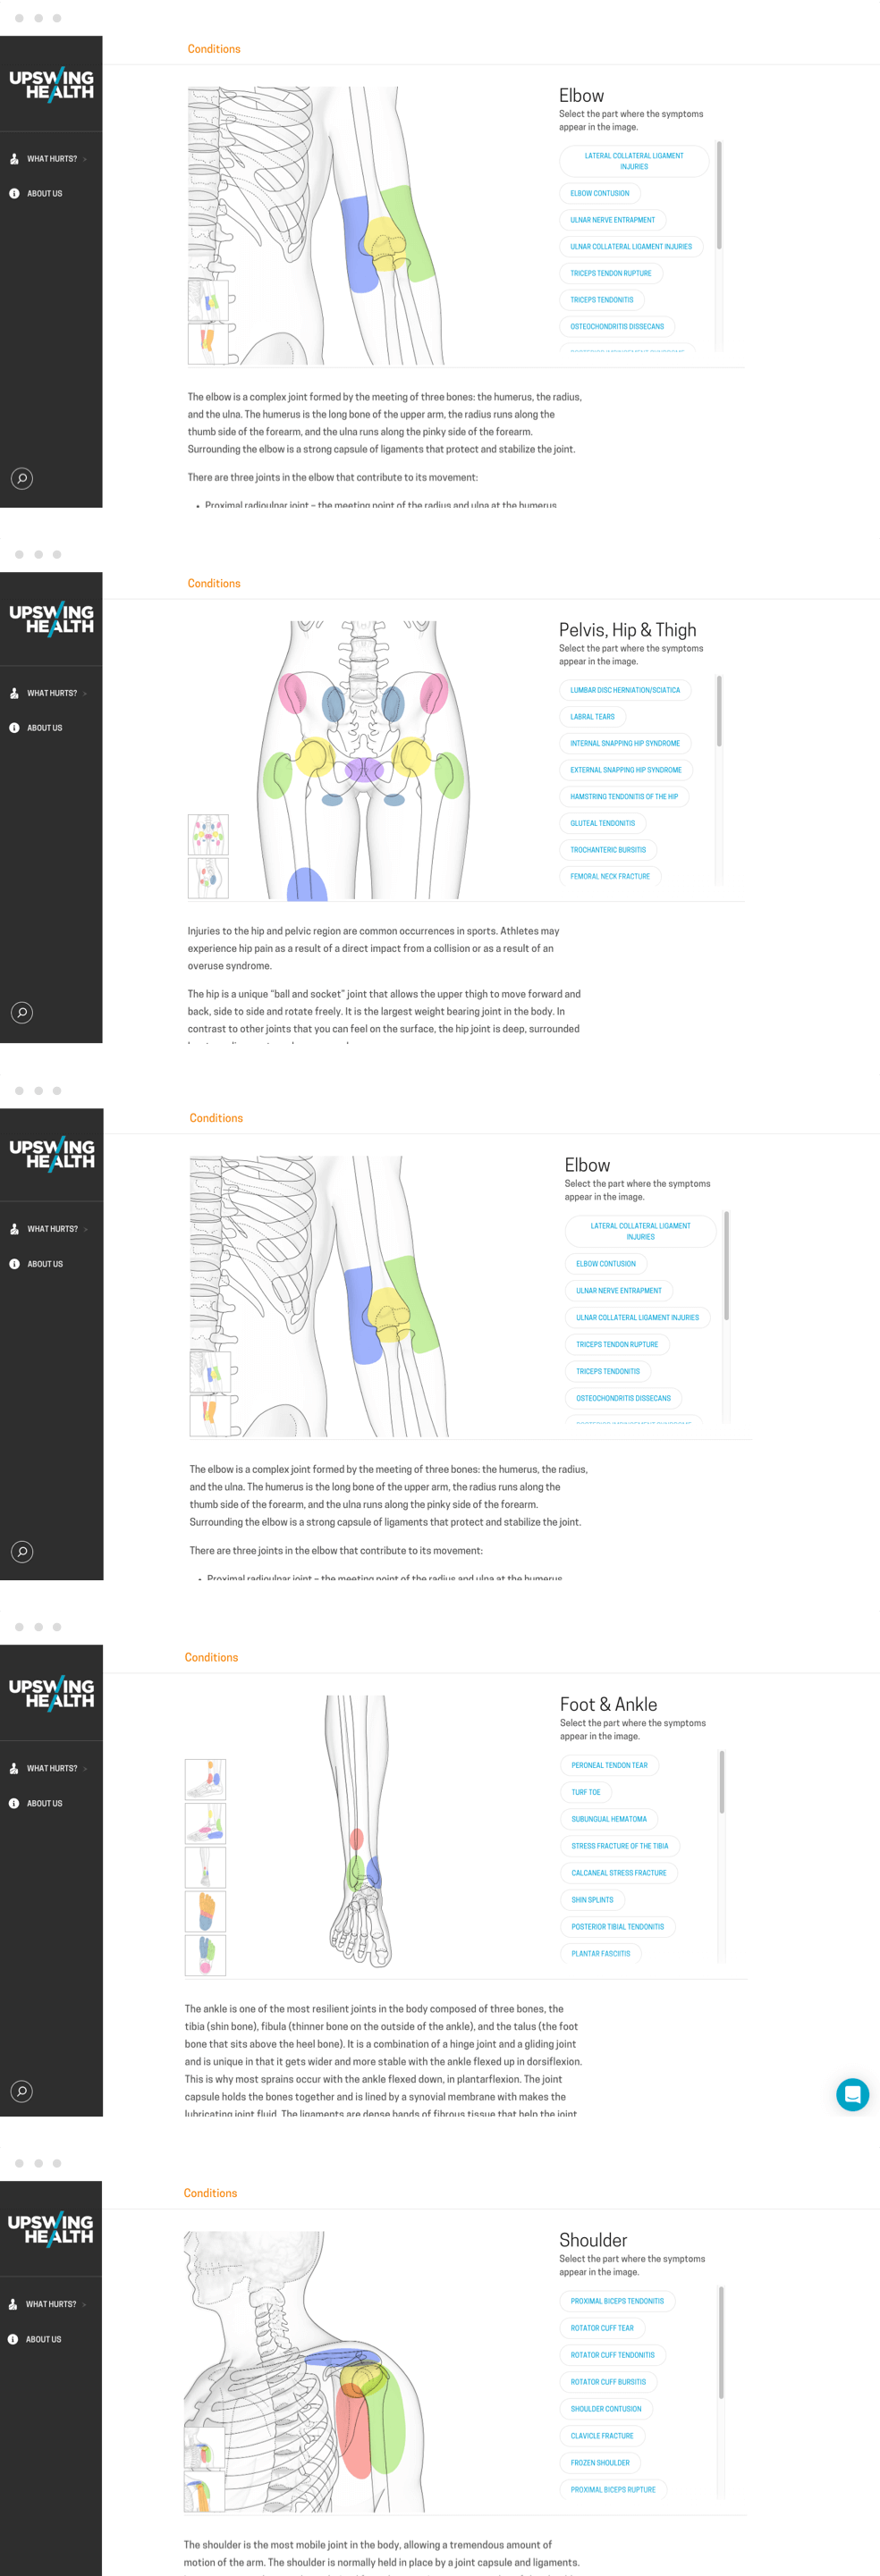 ATTCK case study. Upswing Health body parts pages